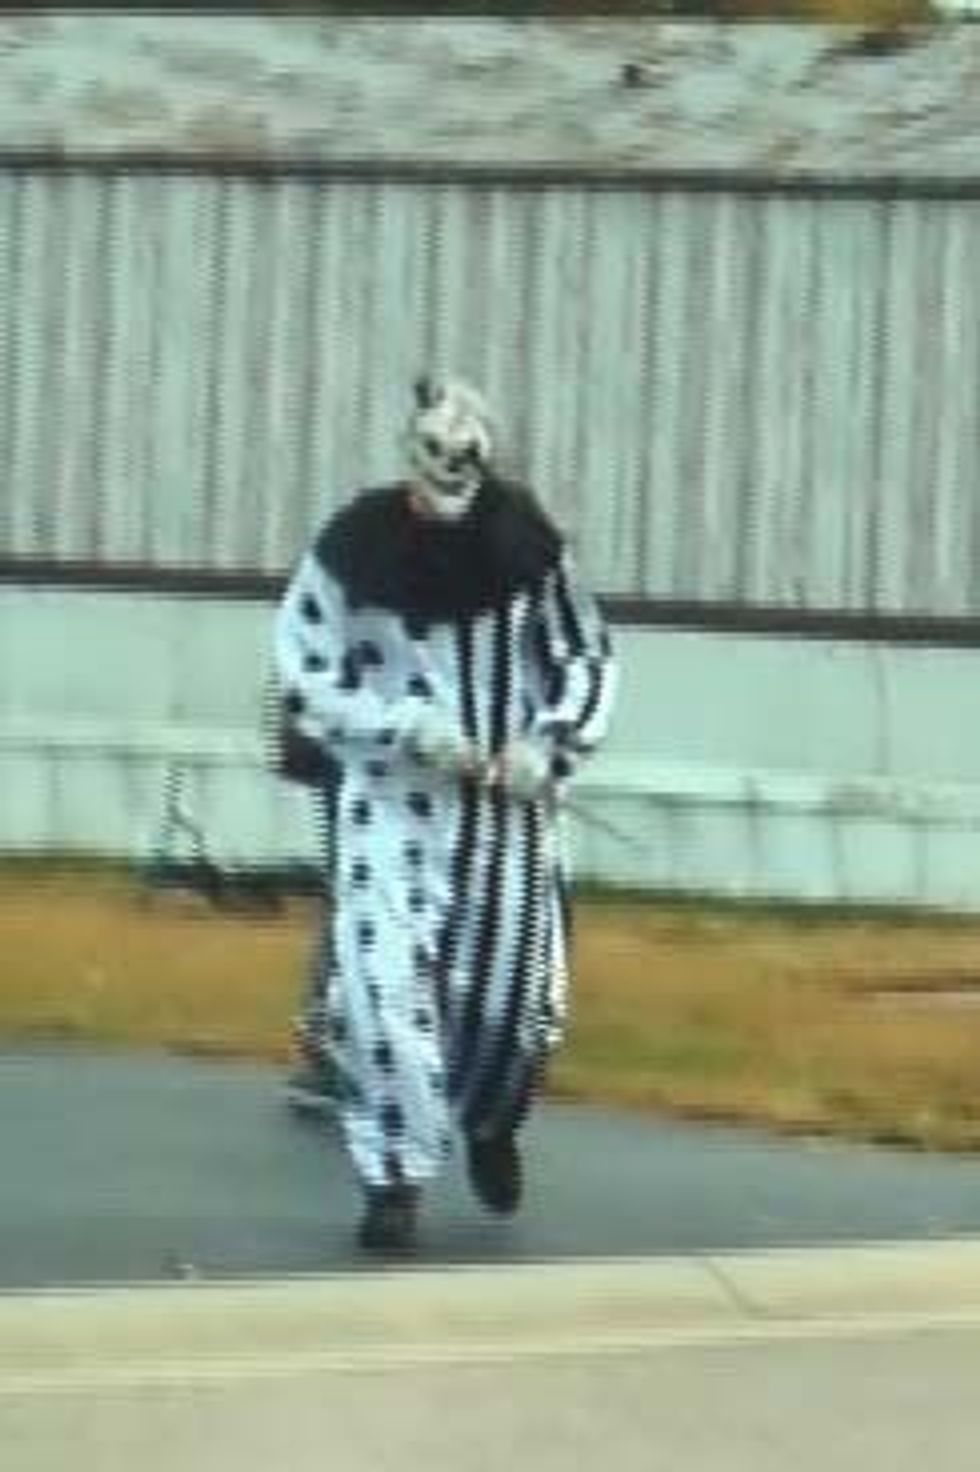 Man Who Dressed Up as Clown With Knife and Scared Kids at a Bus Stop Is an Afghanistan War Veteran Needing More VA Help